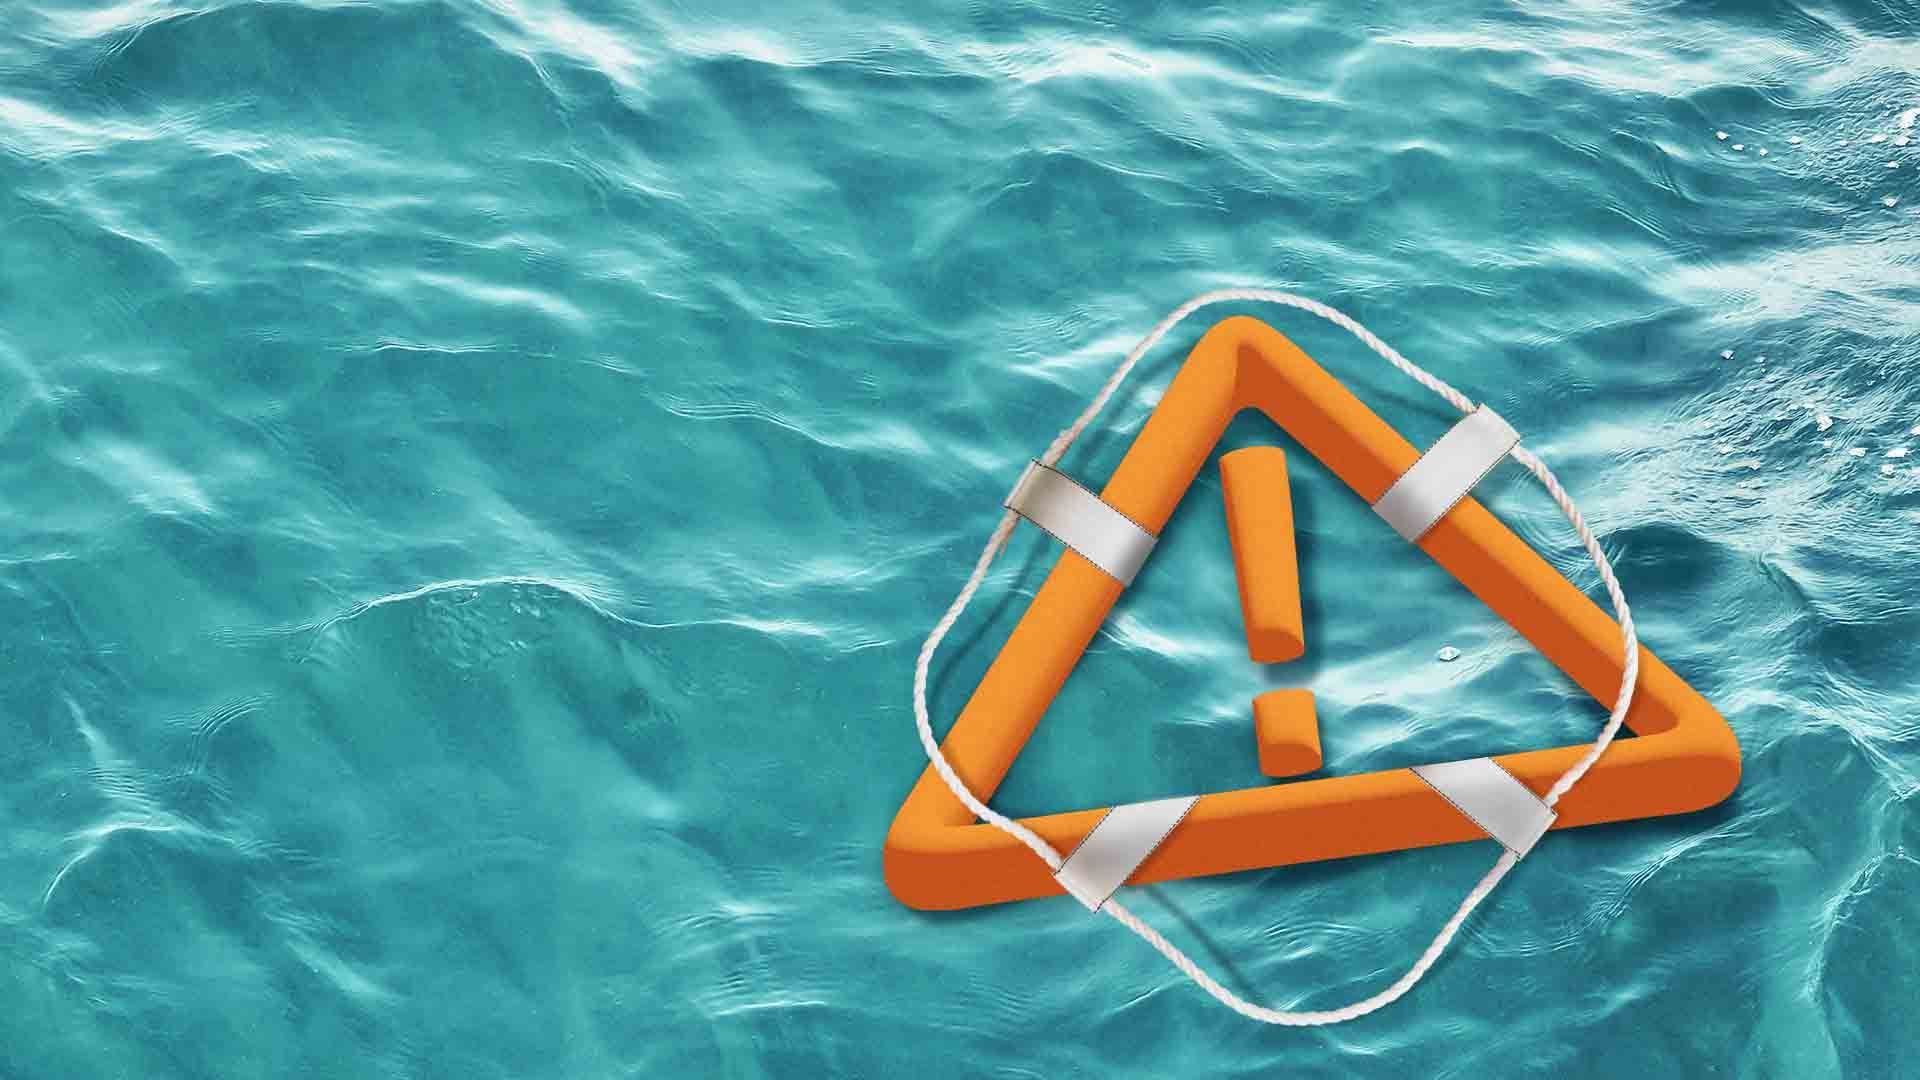 Illustration of a life preserver shaped like a caution symbol floating in water